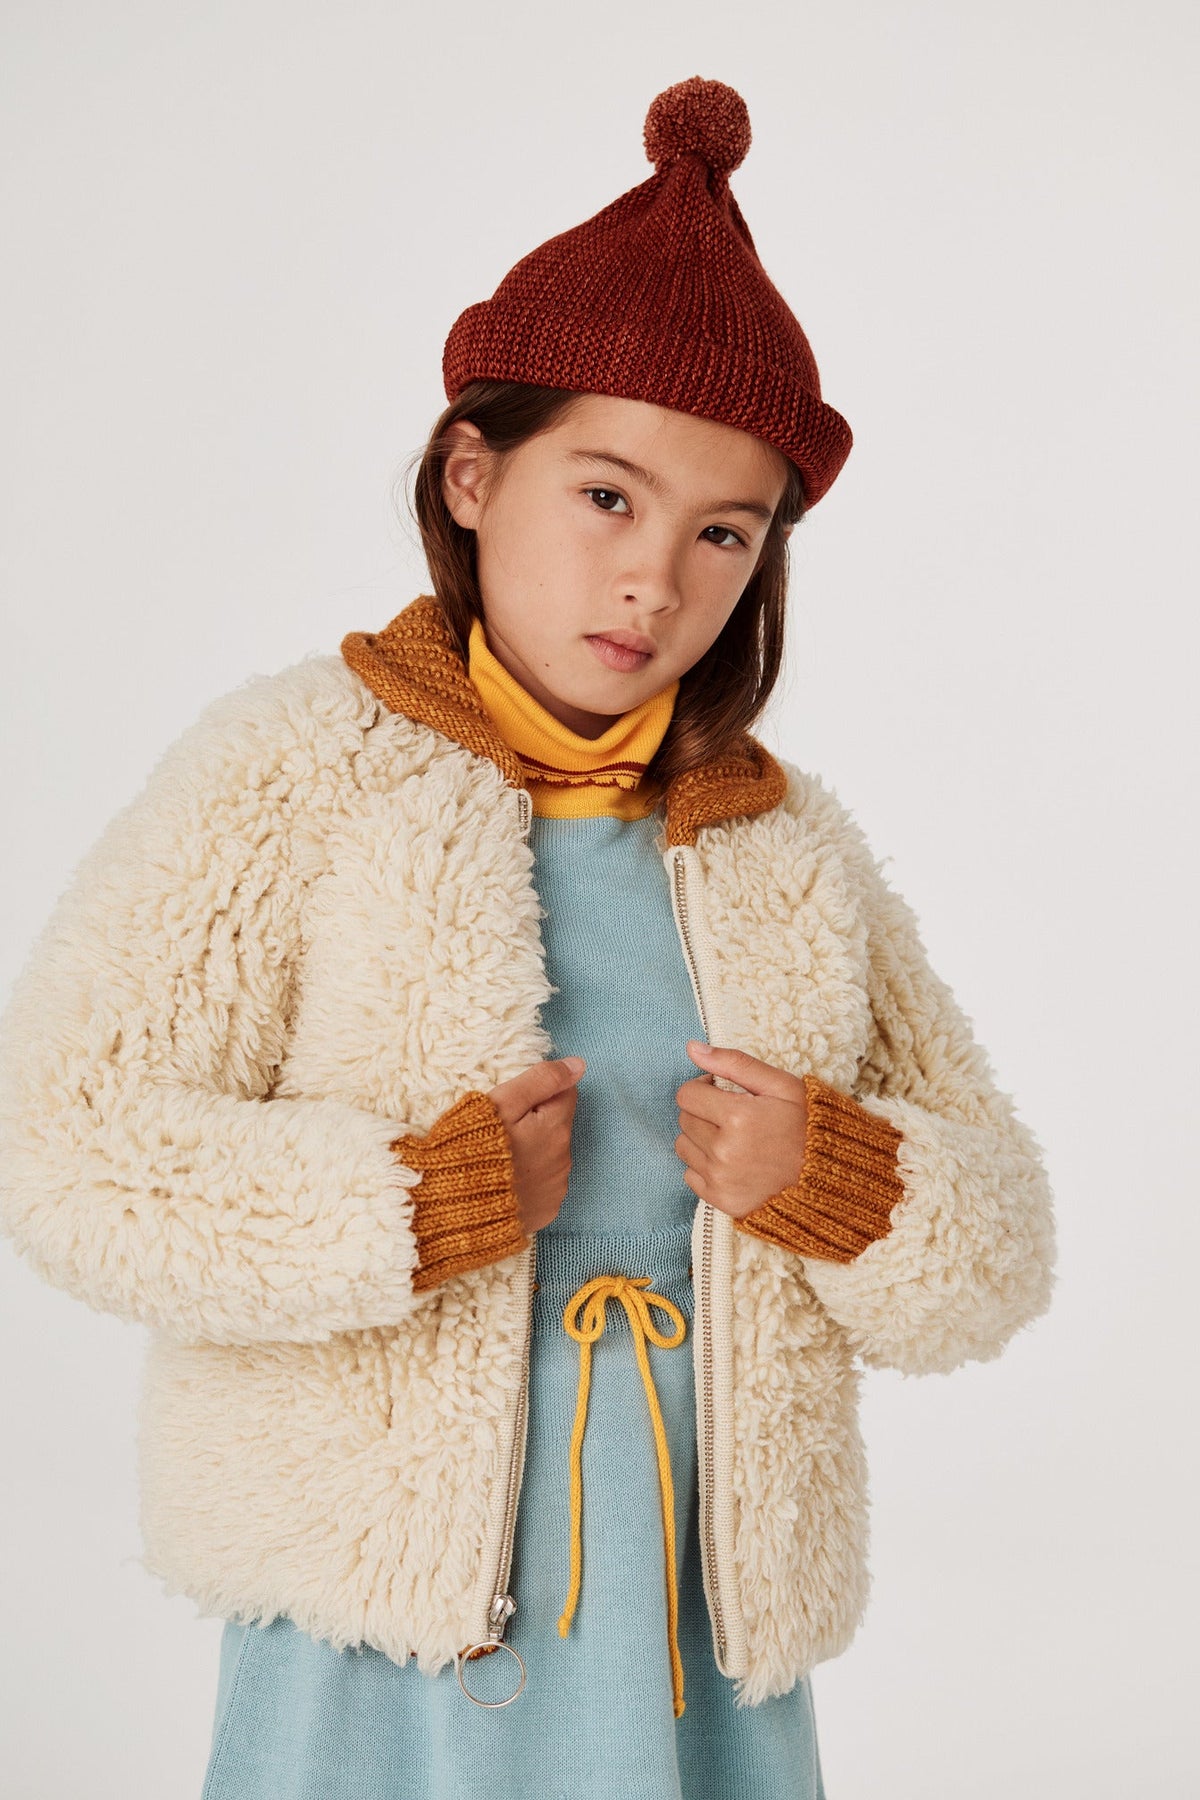 Eco Wool Fur Cardigan - Winter White+Model is 48 inches tall, 47lbs, wearing a size 4-5y